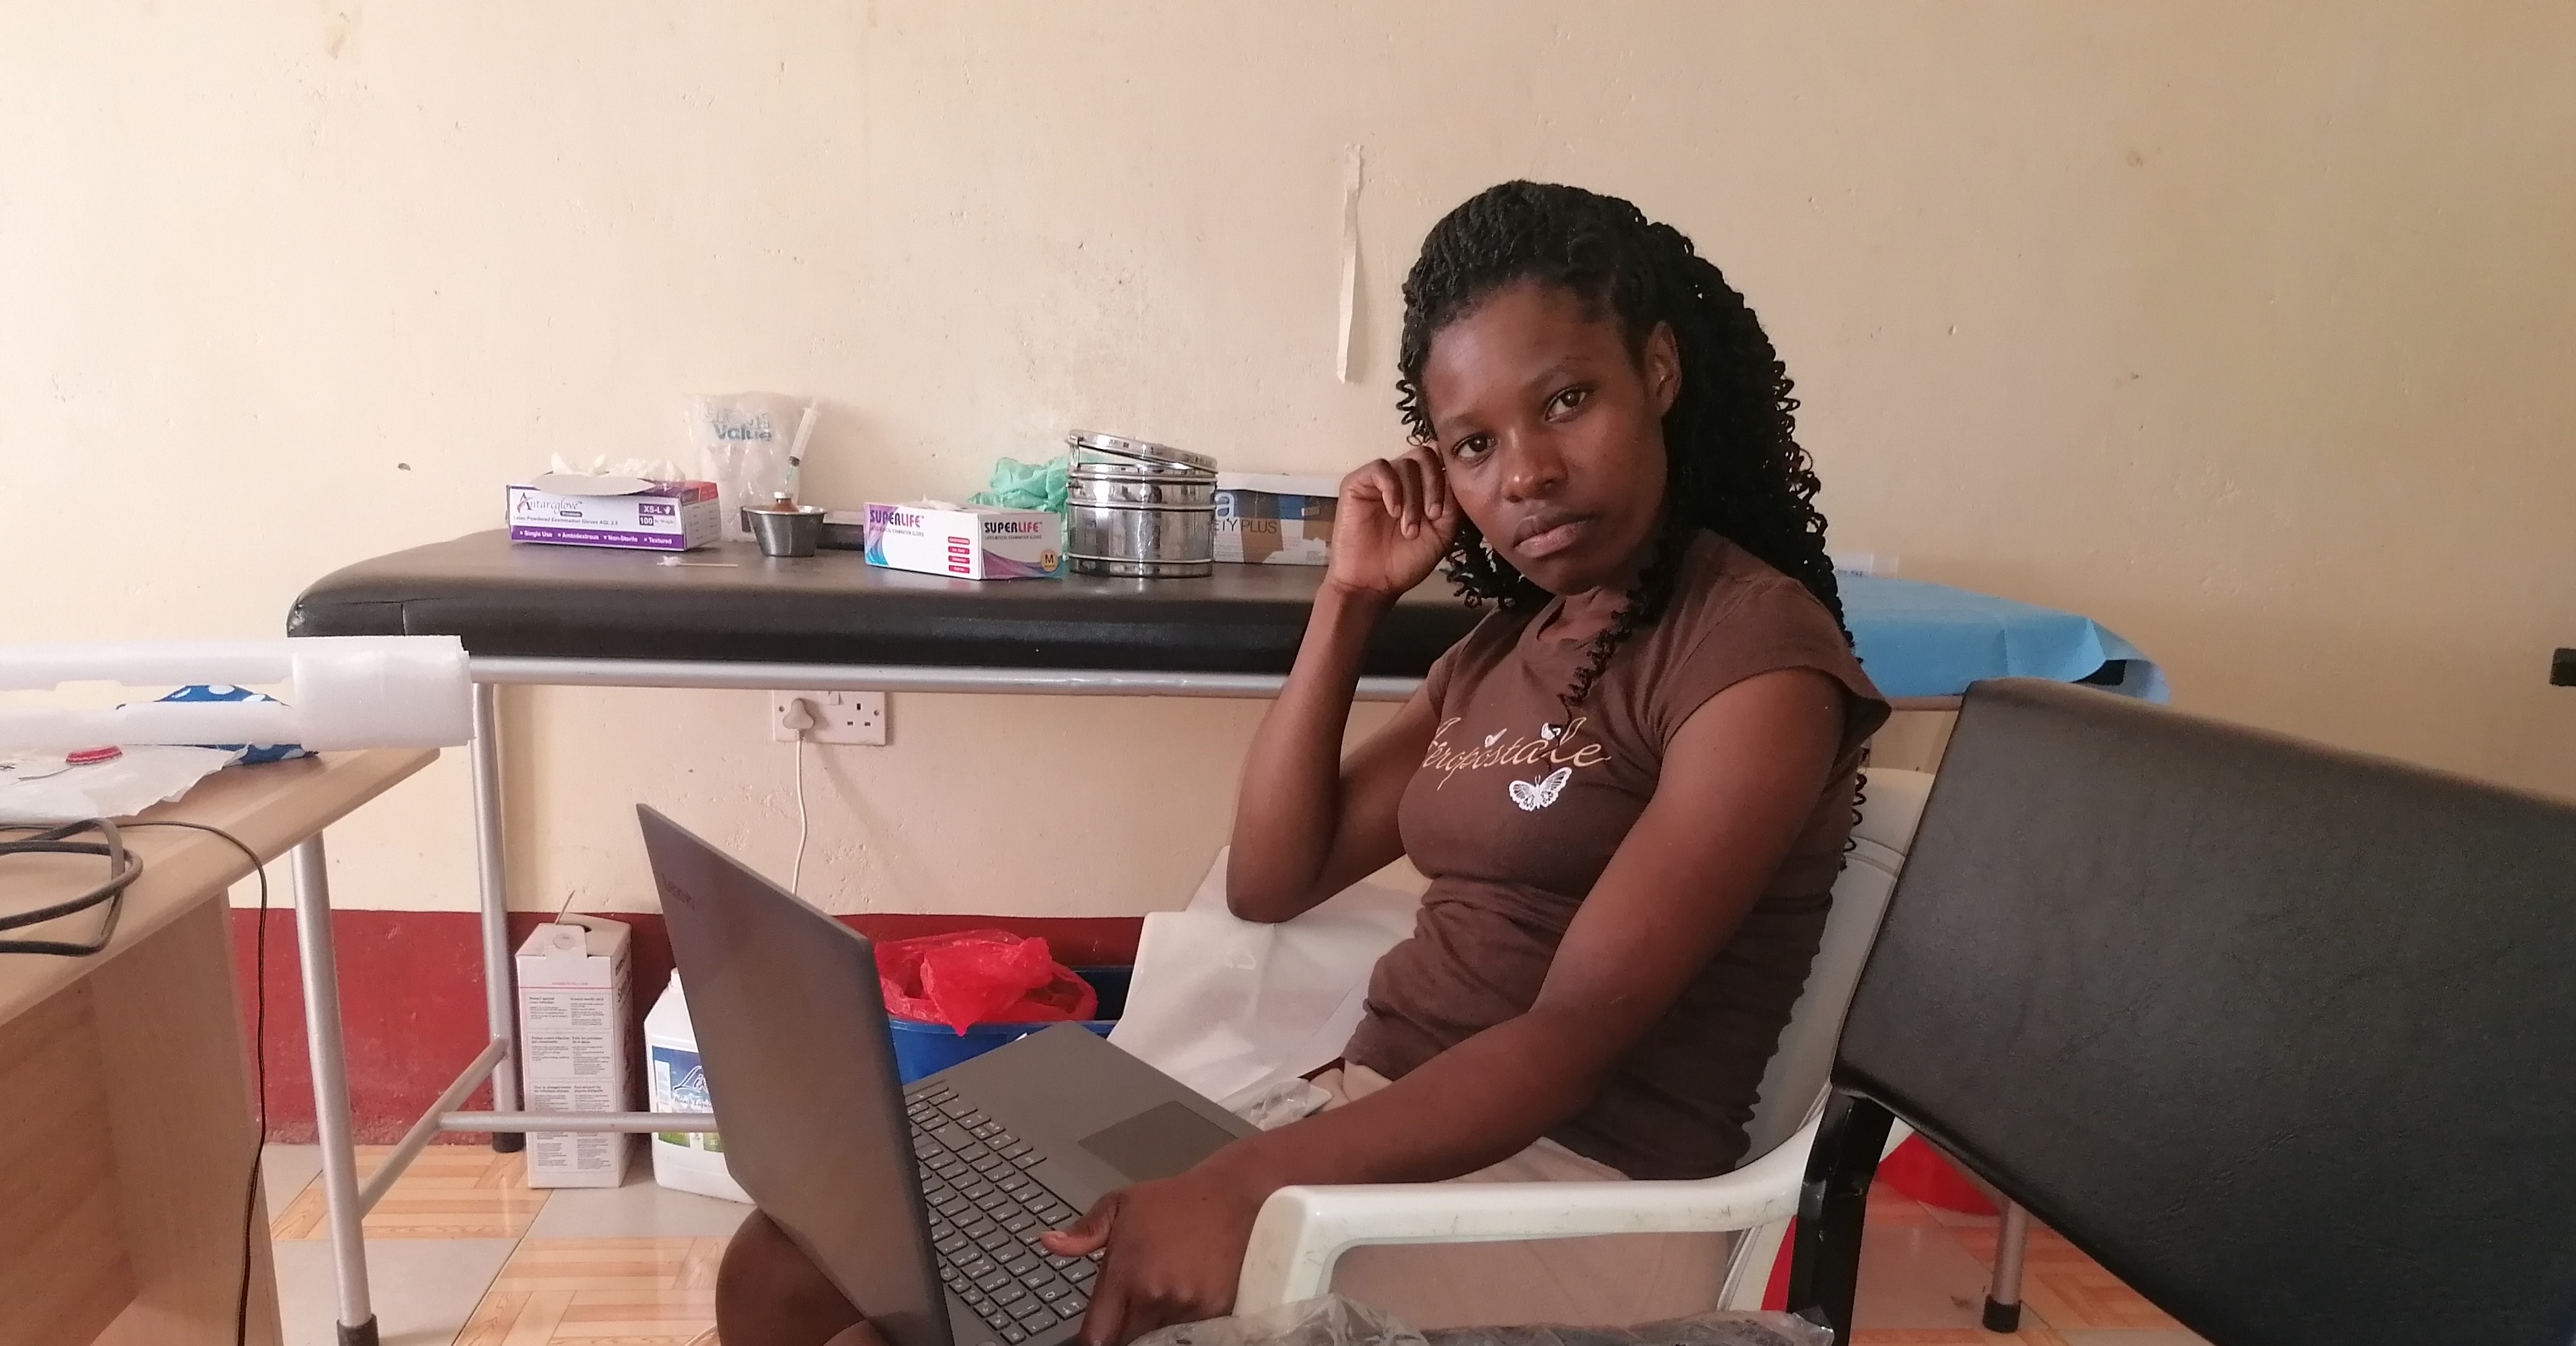 Linet is currently pursuing a Bachelor of Arts in education at St. Paul’s University on an online platform.